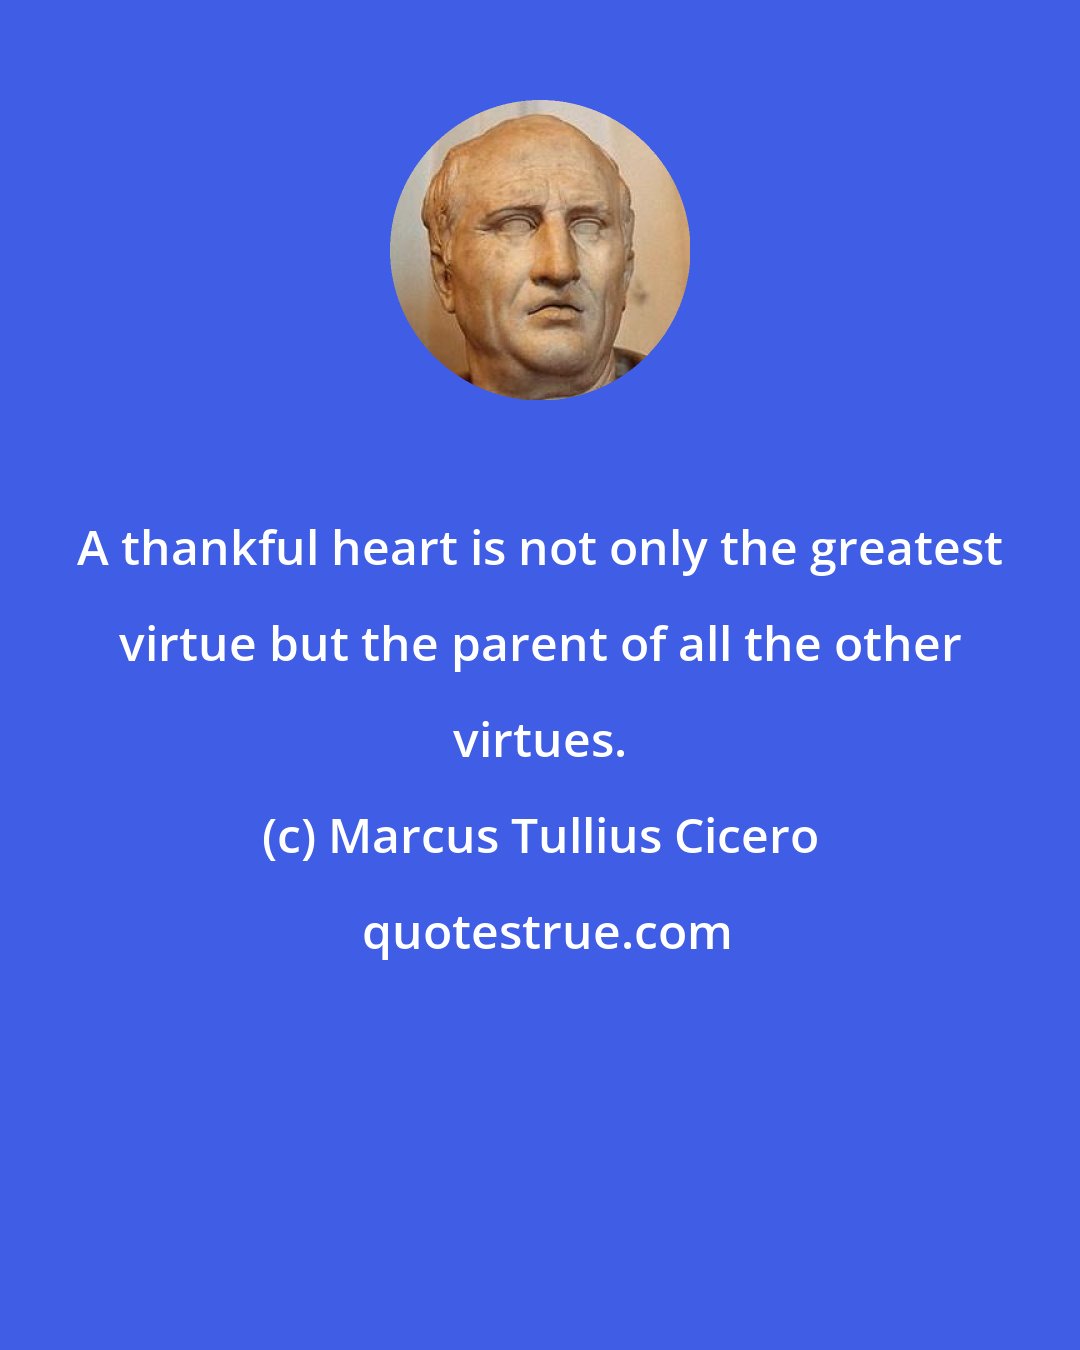 Marcus Tullius Cicero: A thankful heart is not only the greatest virtue but the parent of all the other virtues.